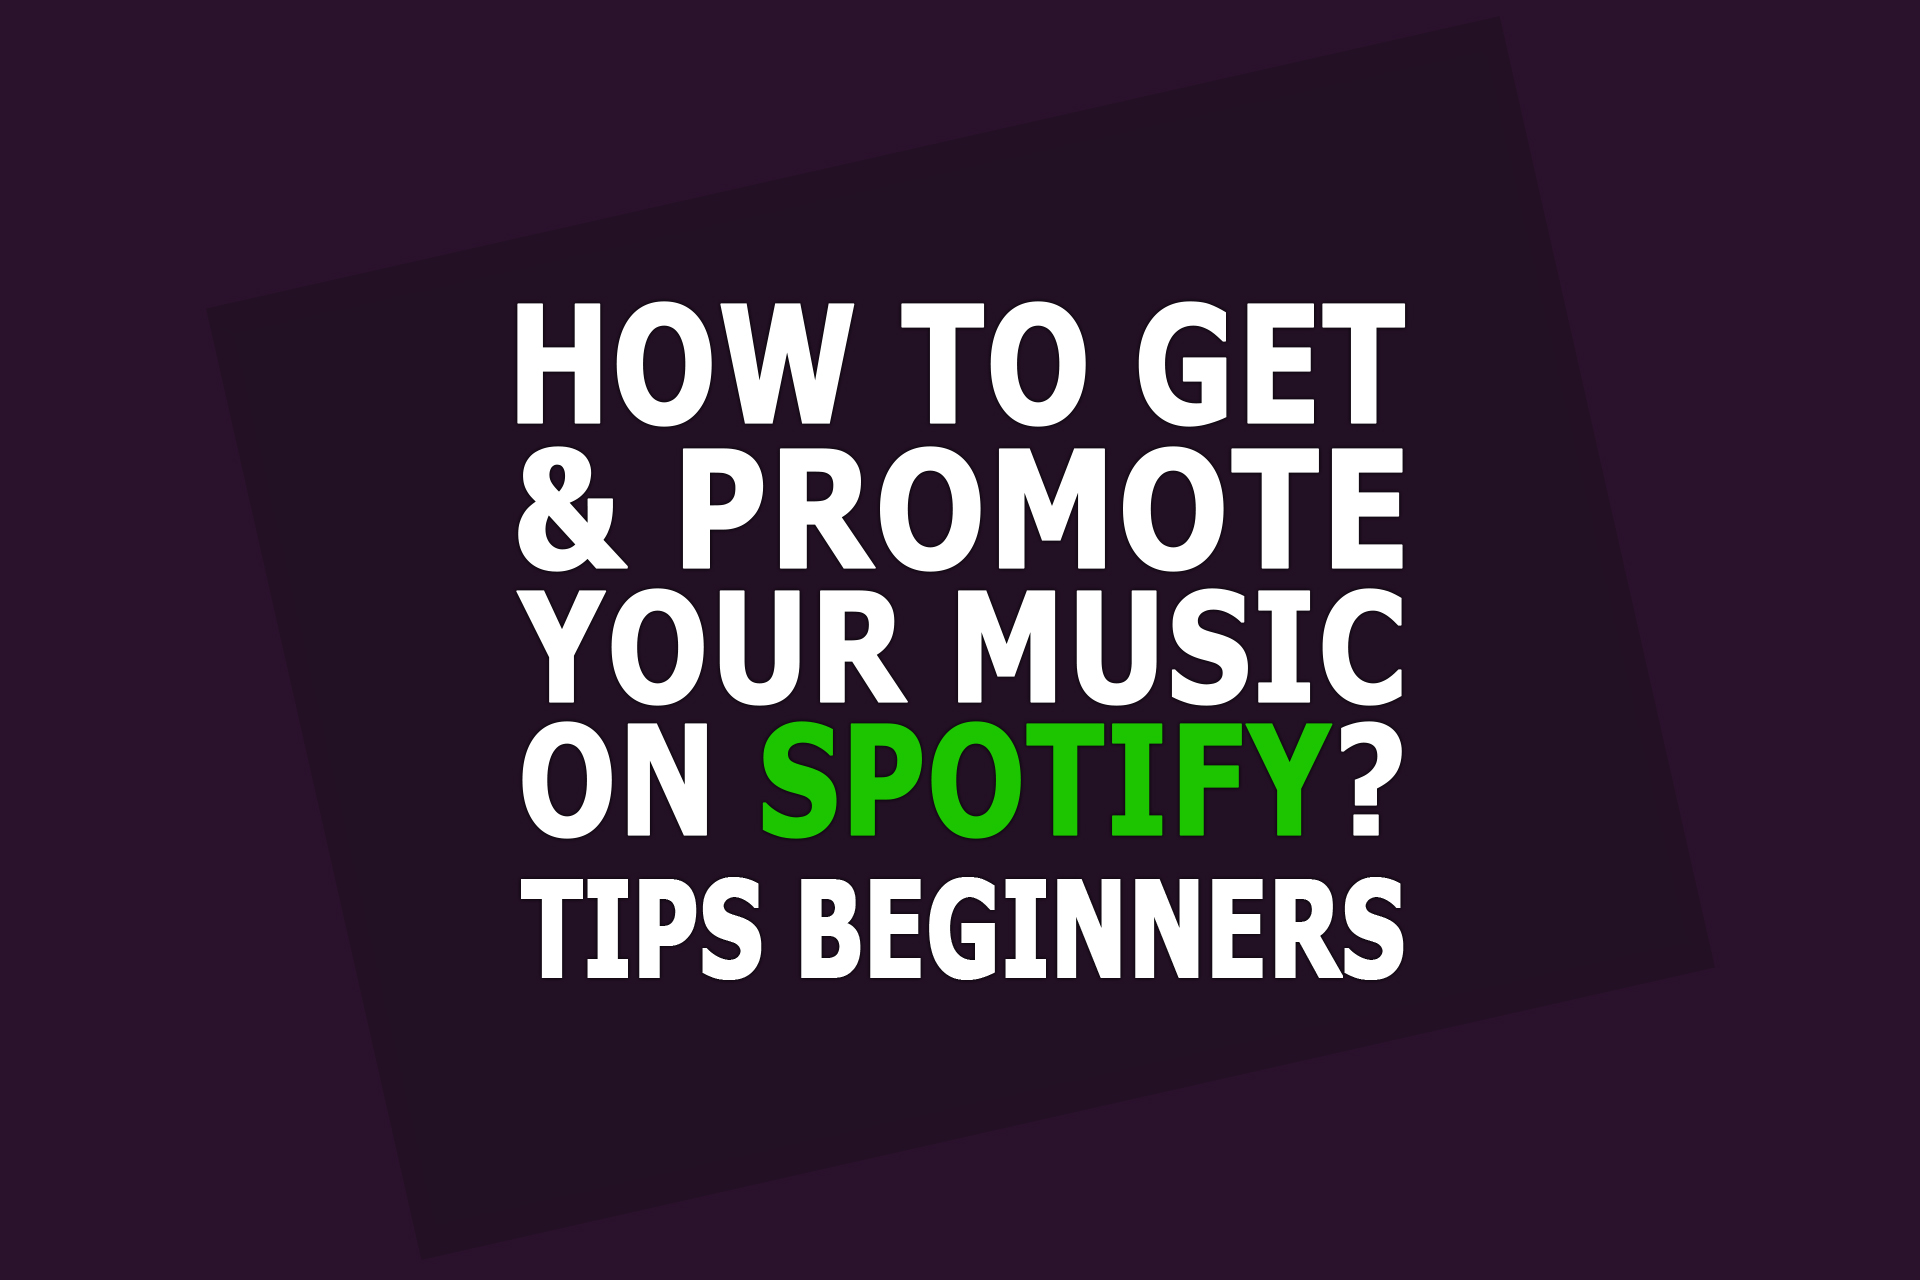 How To Promote Your Music On Spotify? Tips For Beginners